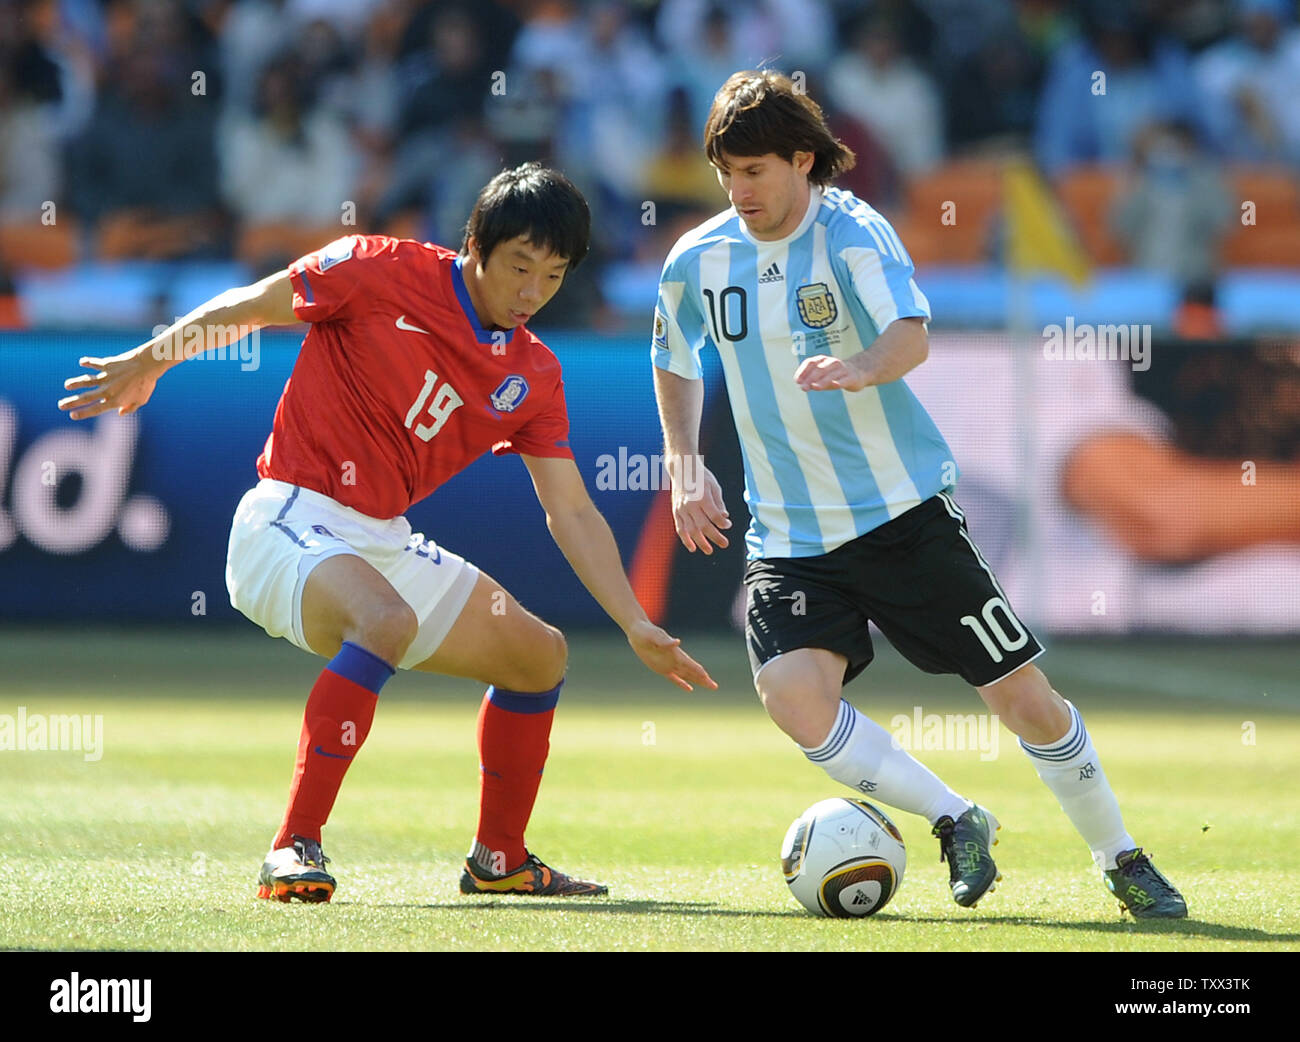 Lionel Messi of Argentina and Yeom Ki Hun of South Korea during the Group B match at Soccer City Stadium in Johannesburg, South Africa on June 17, 2010. UPI/Chris Brunskill Stock Photo